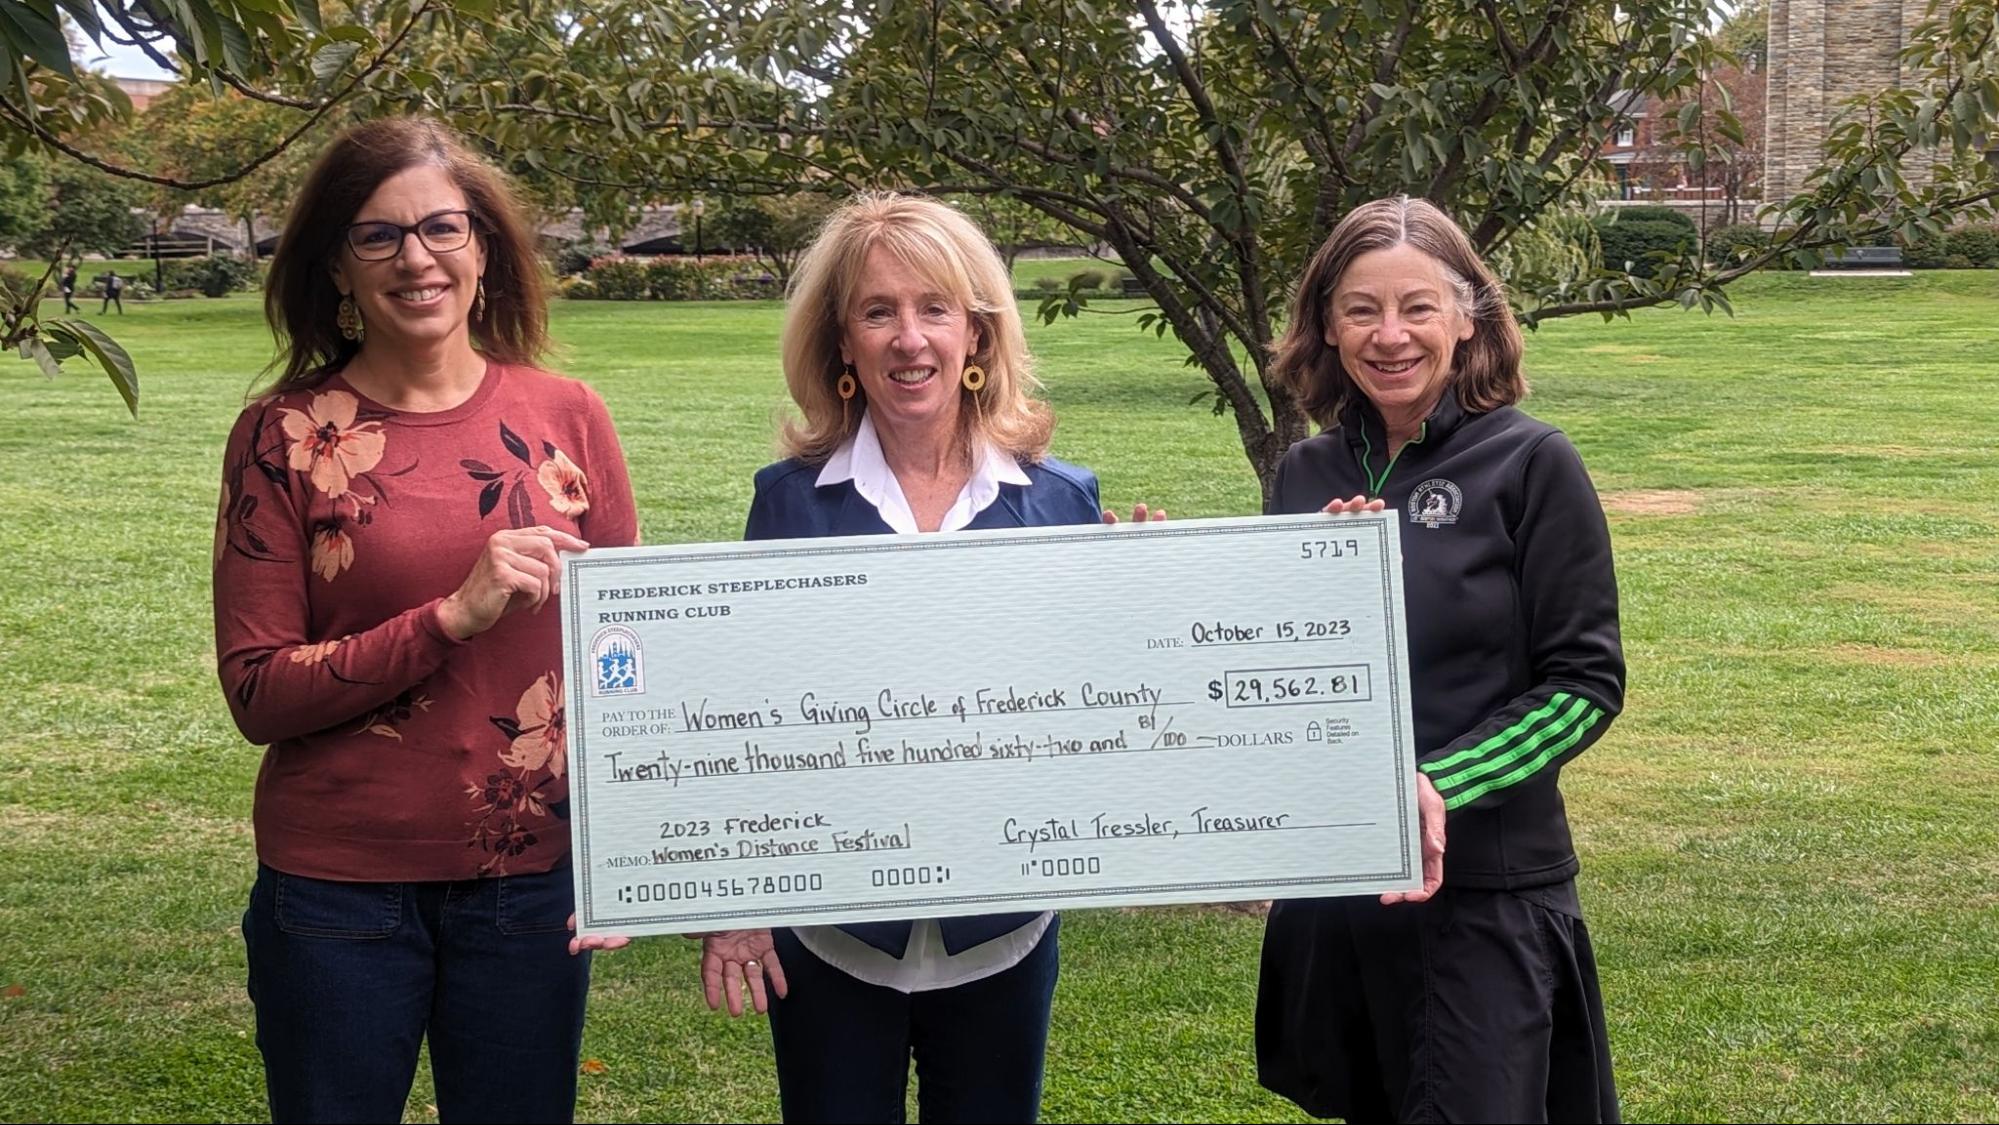 Left to Right, Michele Newton, President, Frederick Steeplechasers Running Club; Bonnie Swanson, Chair, Women's Giving Circle; Harriet Langlois, Race Director, Frederick Steeplechasers Running Club